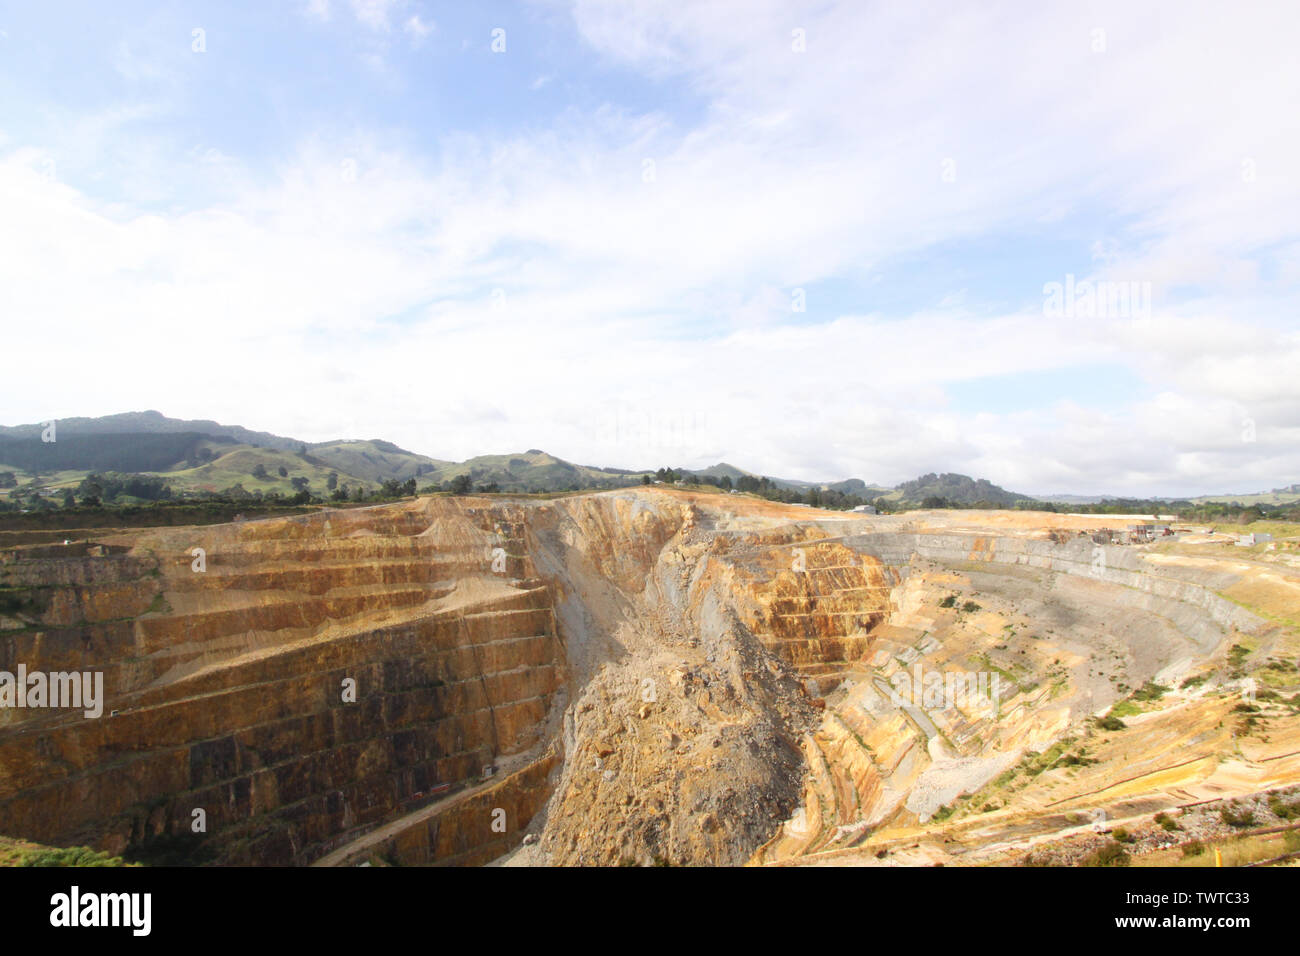 The Martha Mine is a open-cast gold mine in the New Zealand town of Waihi. The picture shows the large landslides that occured in April 2015 and 2016. Stock Photo